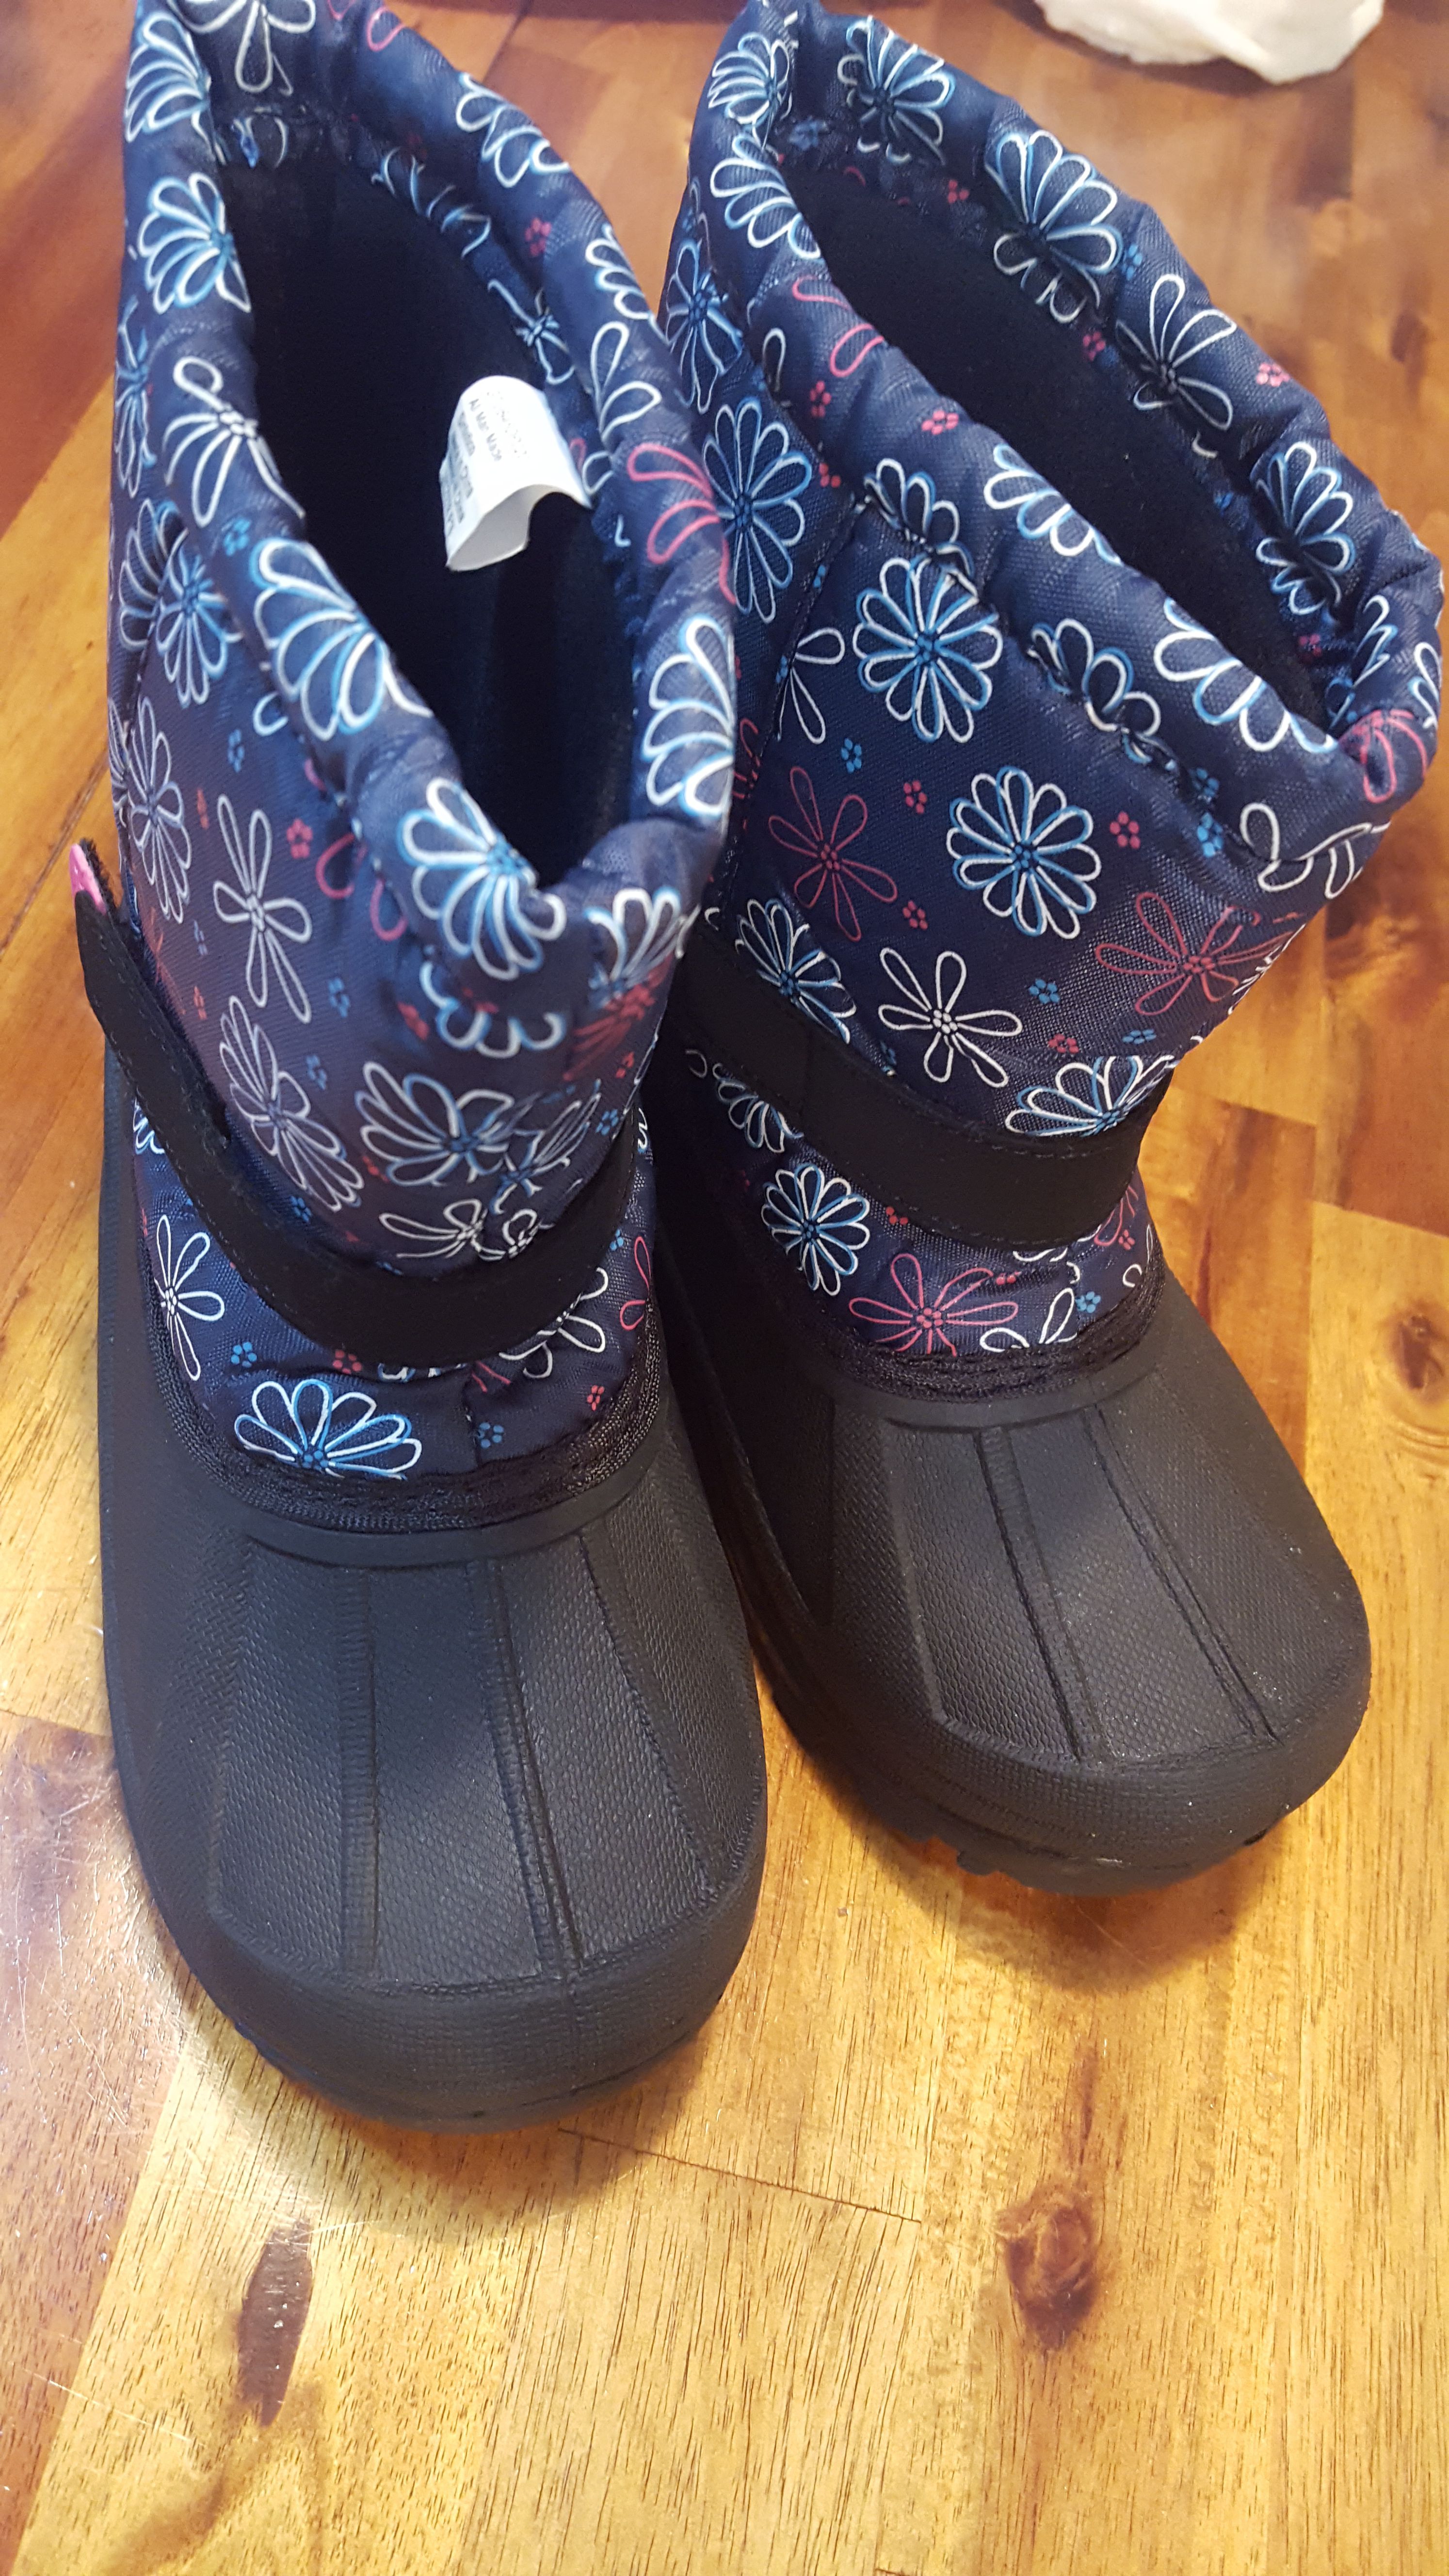 Girls Winter boots - size 11c